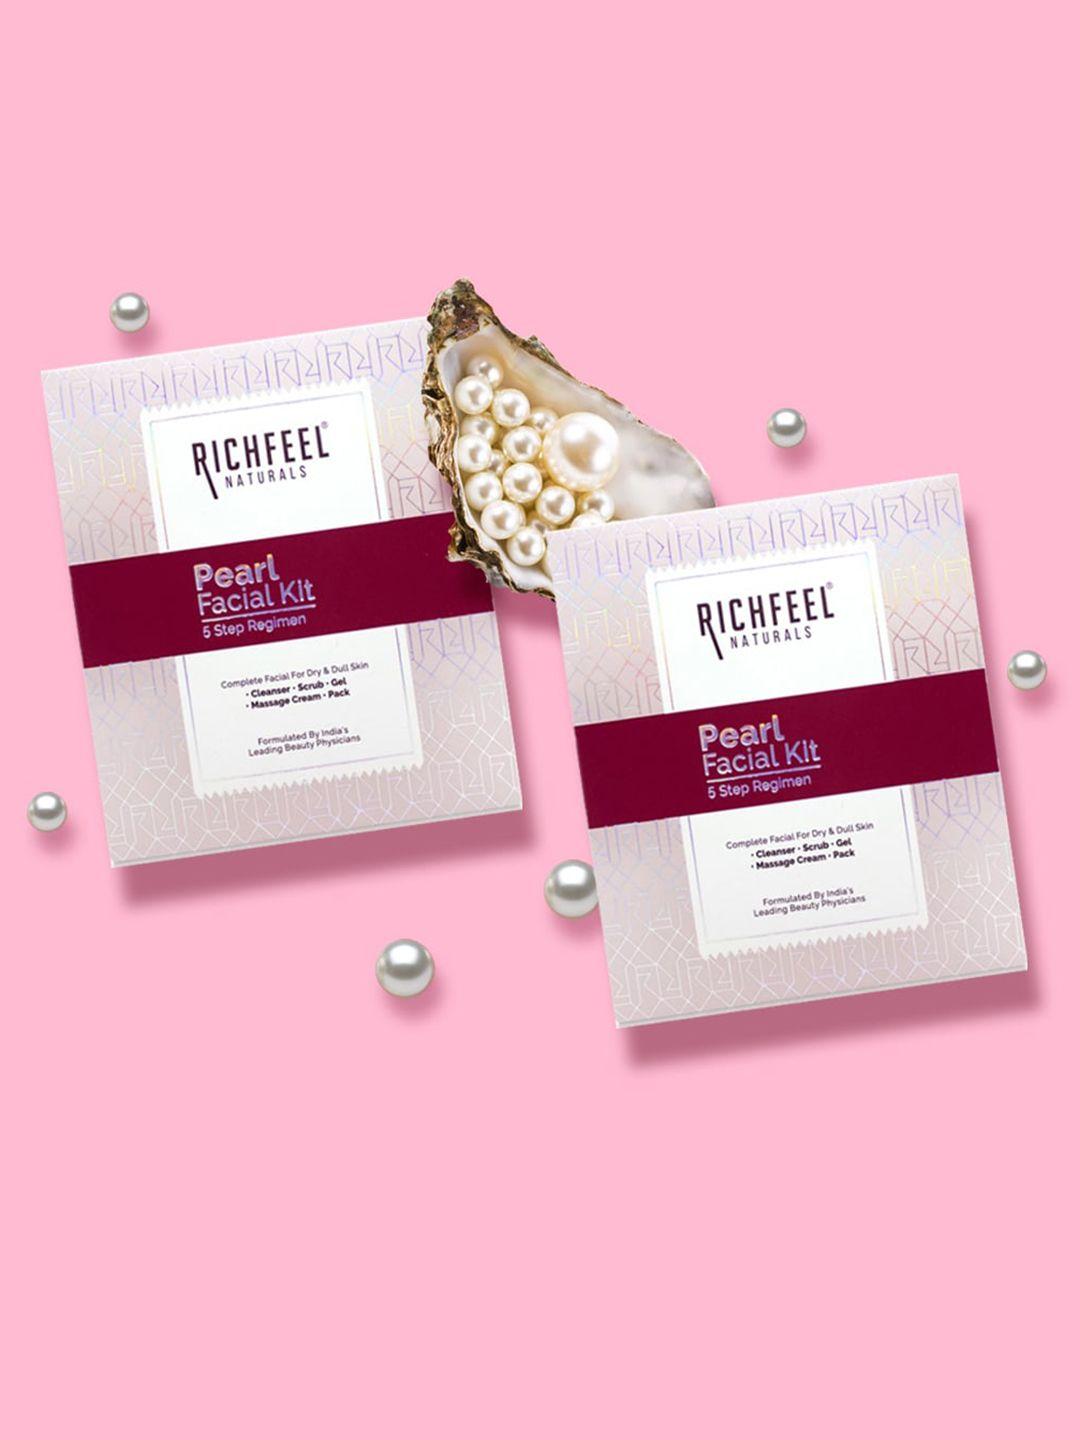 richfeel pack of 2 white pearl facial kit 5x6g